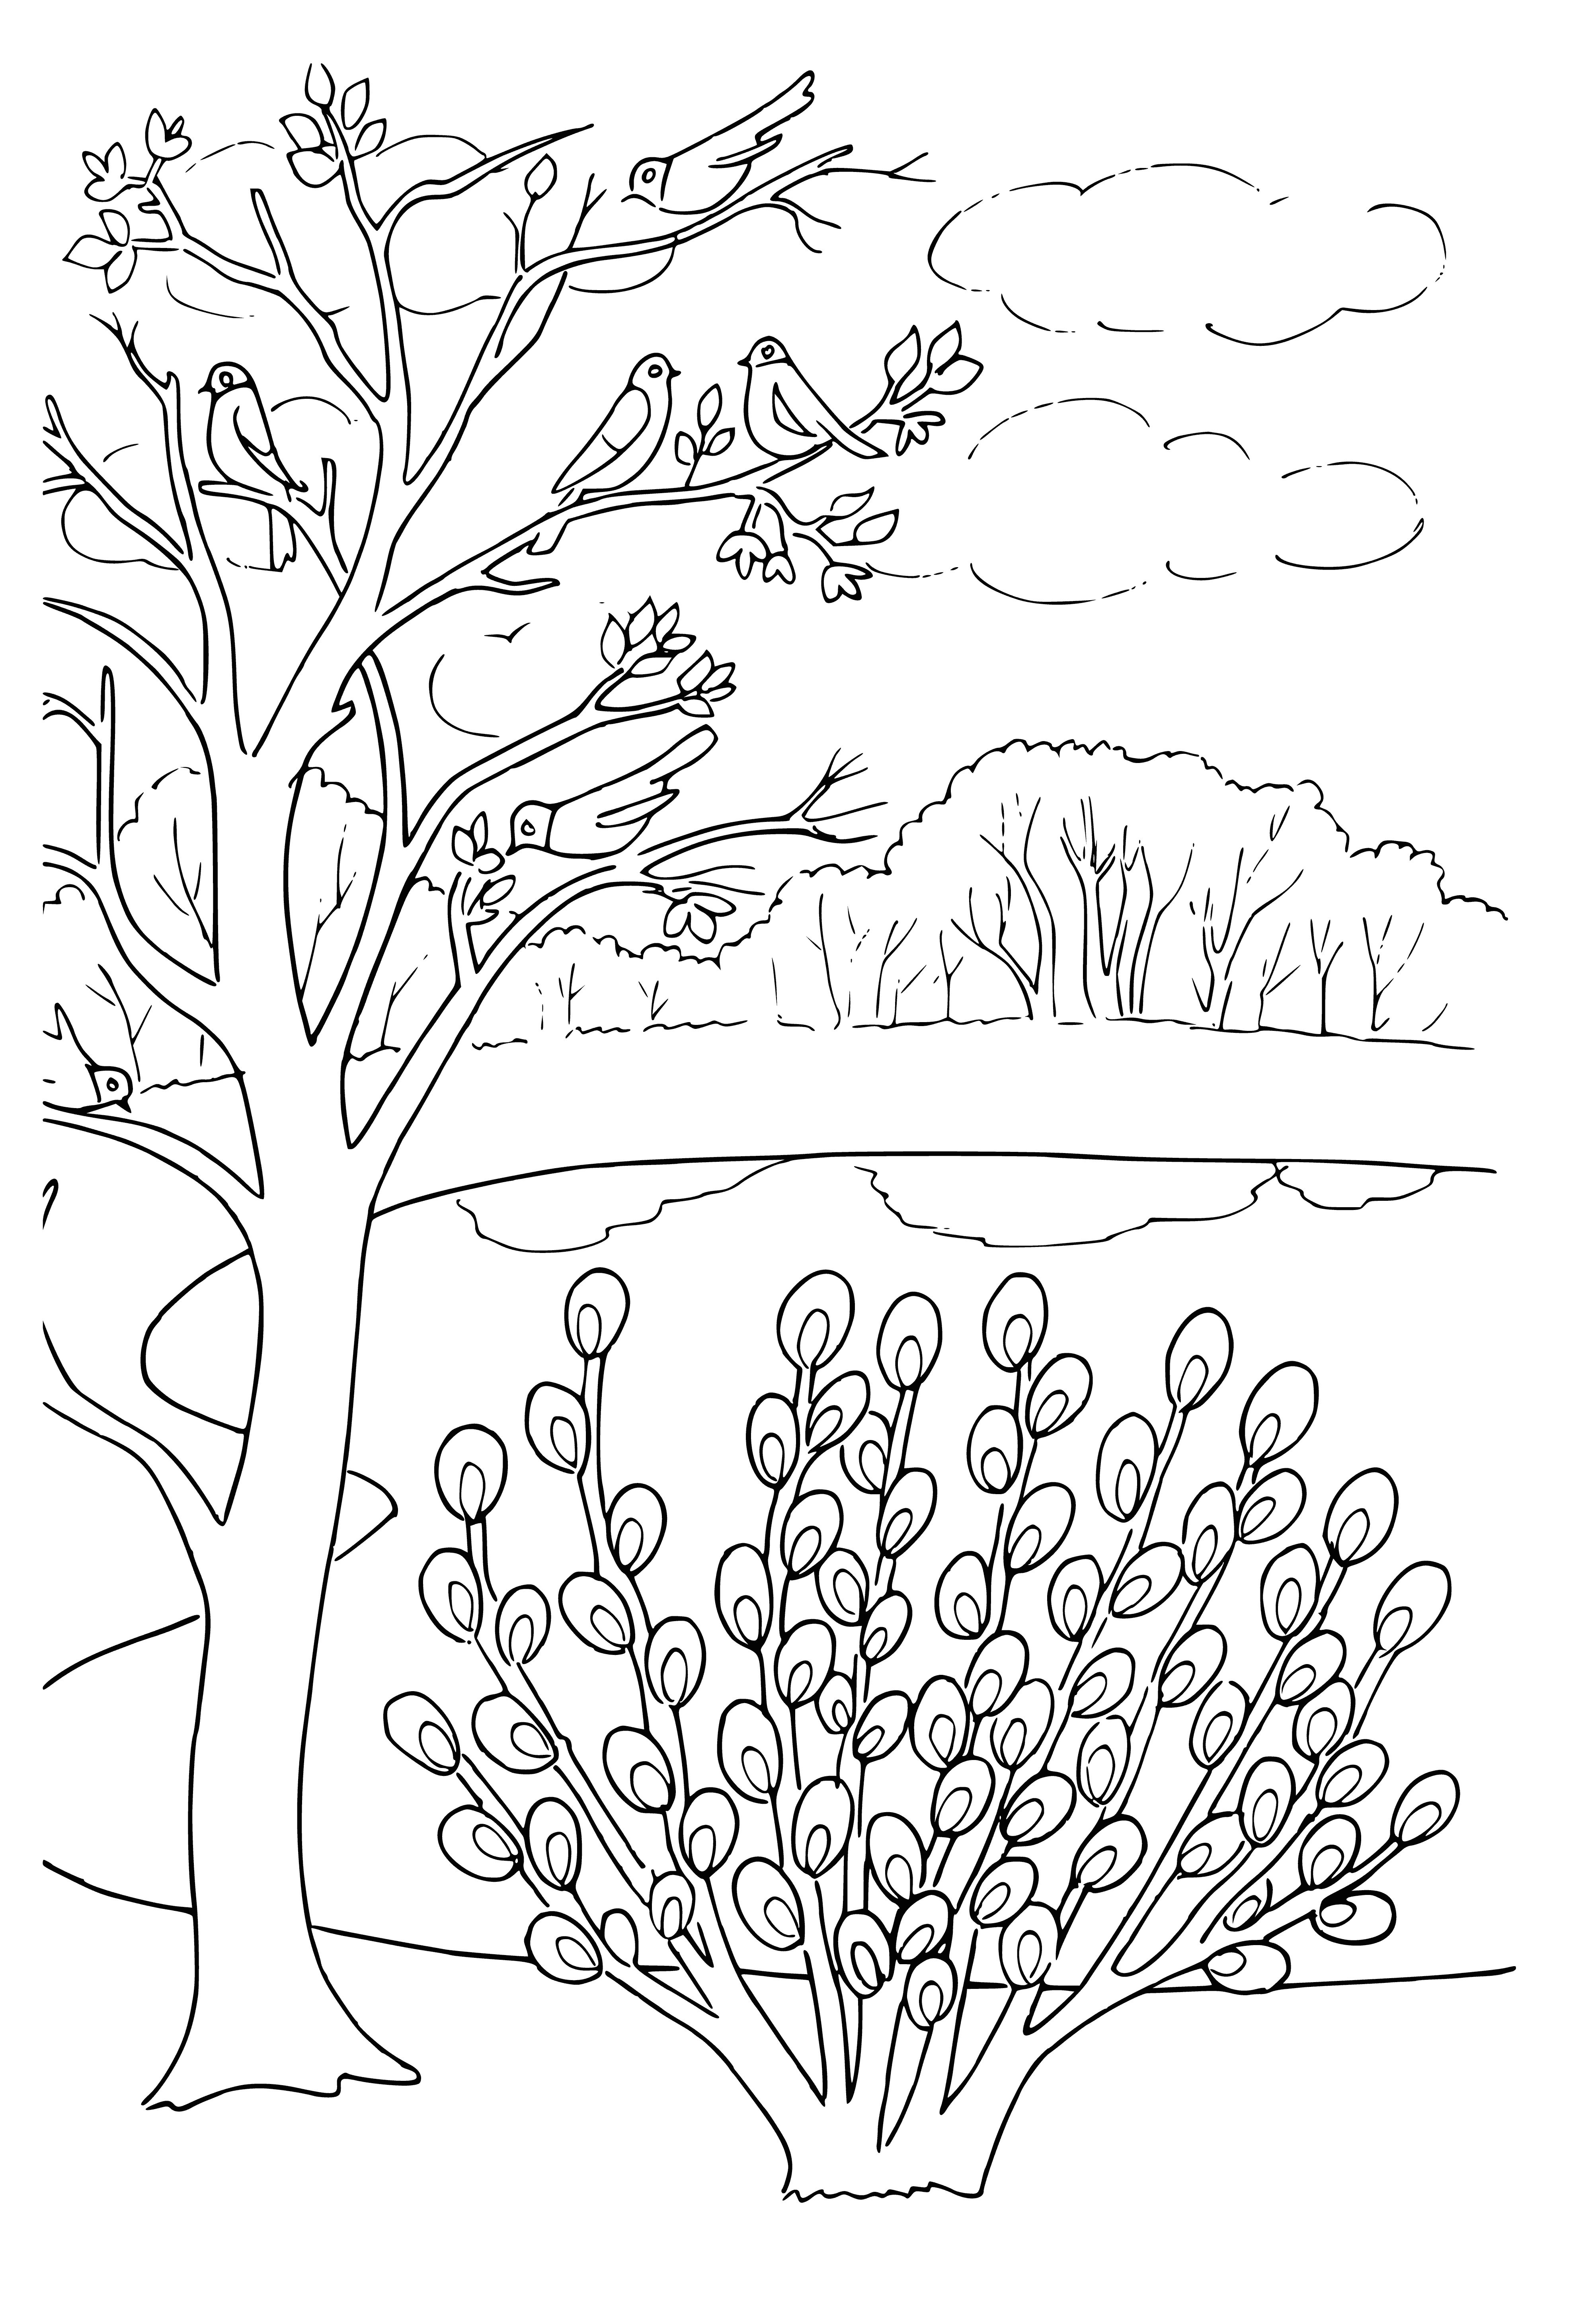 coloring page: Girl in white dress holds willow tree branch, blue scarf blowing in wind.